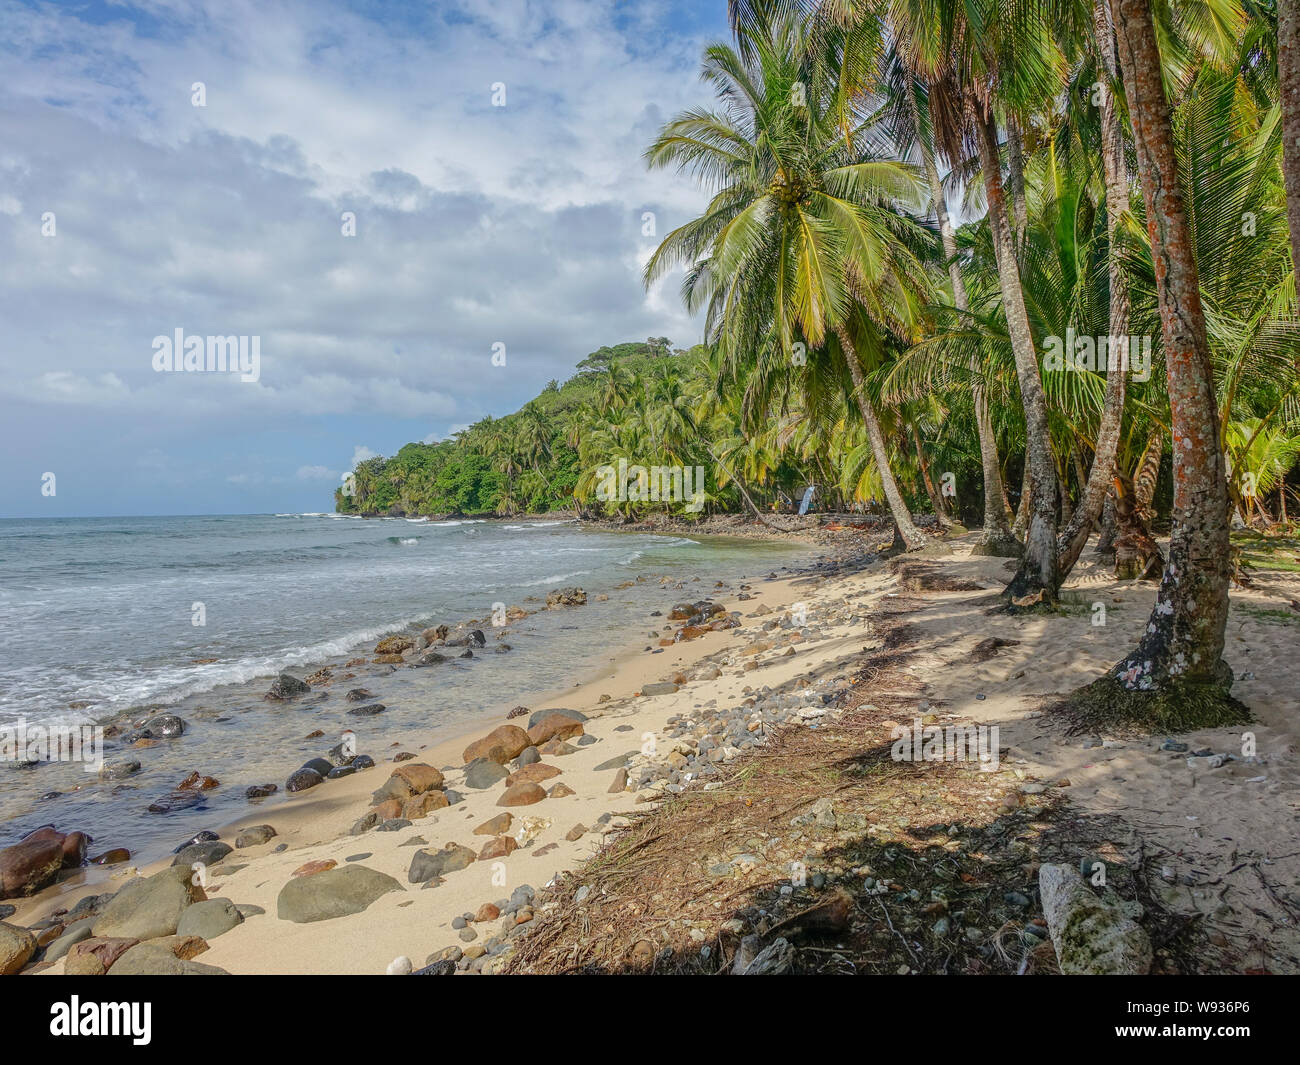 Bastimentos Island, Bocas del Toro, Panama - March 18, 2017: Lonely beach with some rocks on the shore and palm trees under a cloudy sky Stock Photo